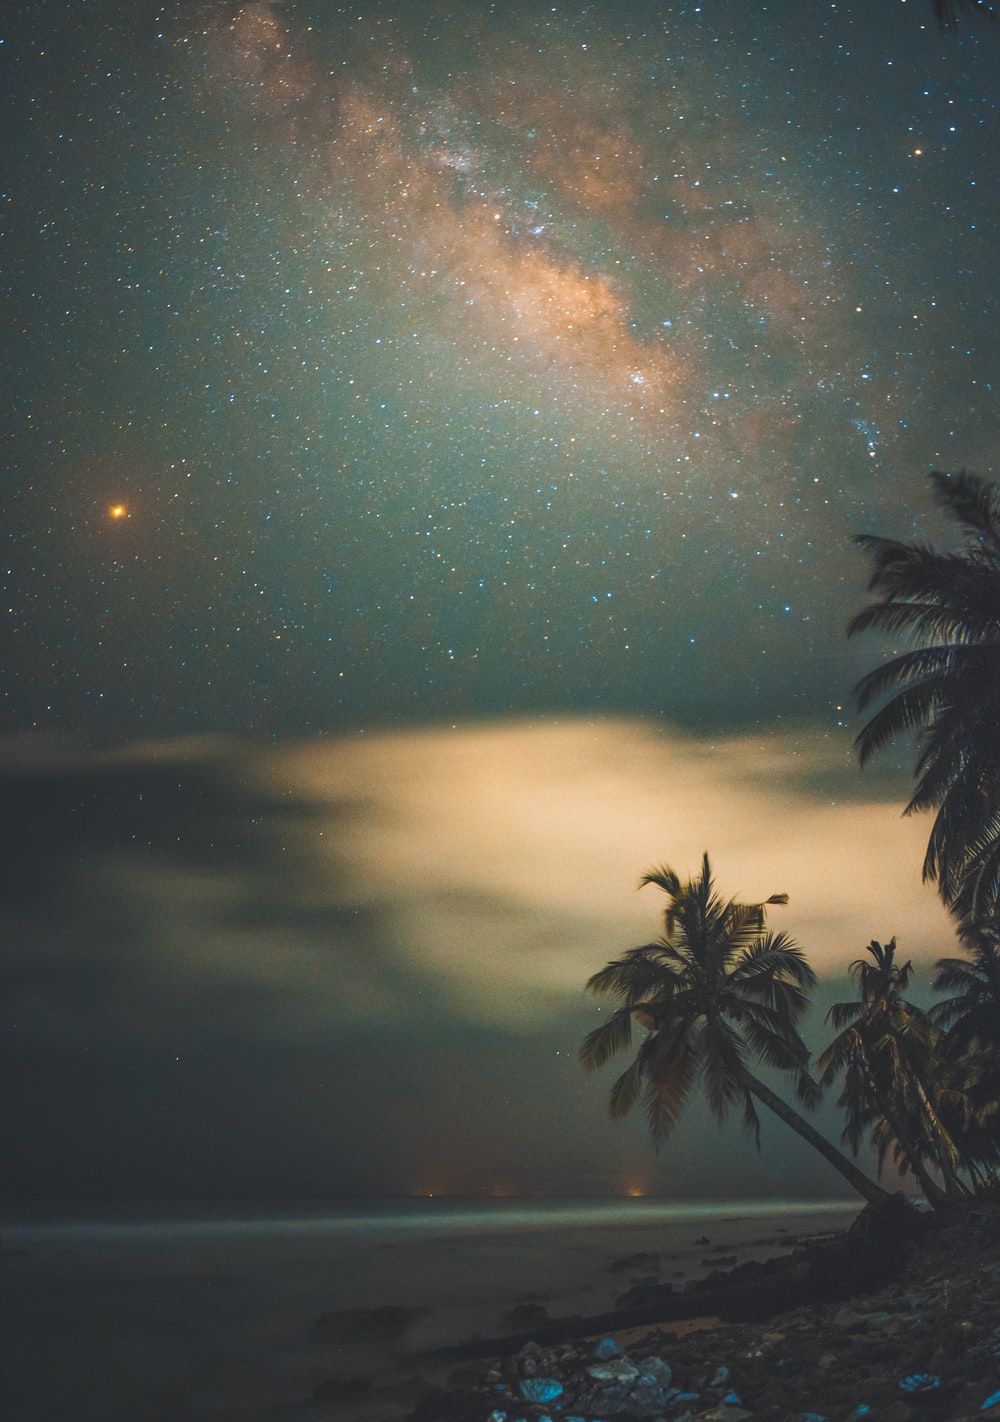 Tropical Night Picture. Download Free Image